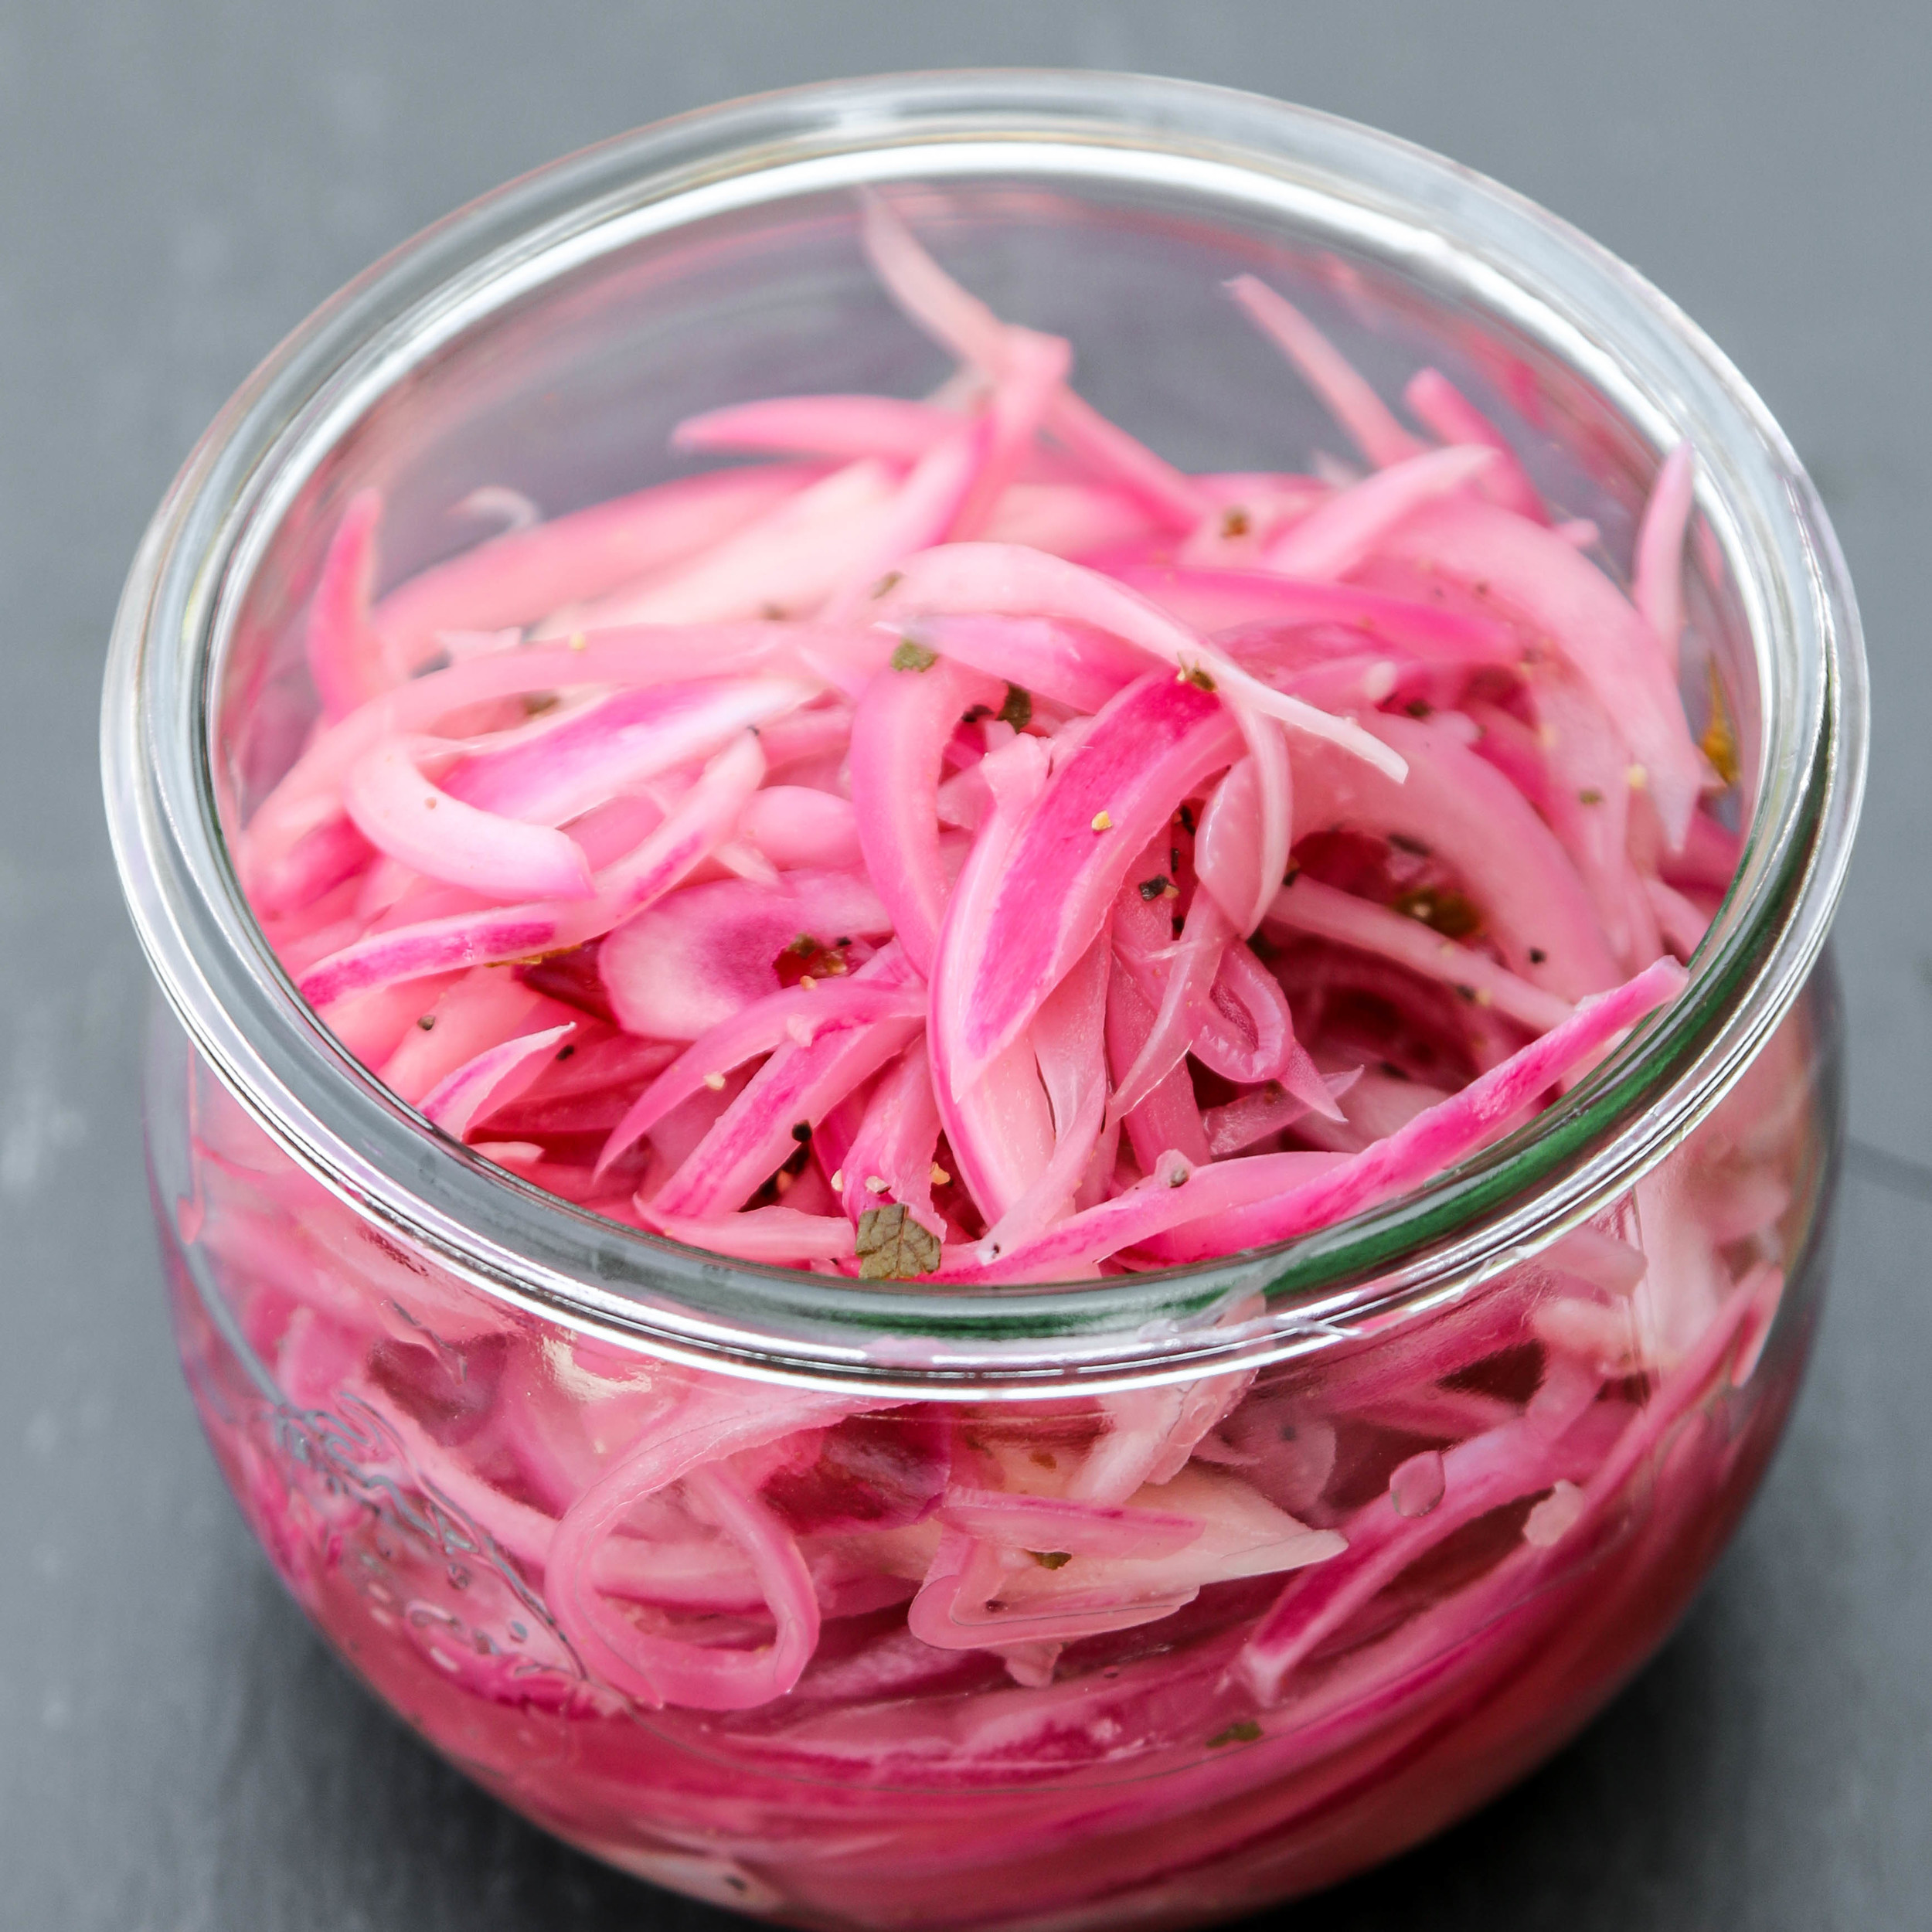 The Hungry Hounds— Yucatán Quick Pickled Red Onions, Escabeche De Cebolla